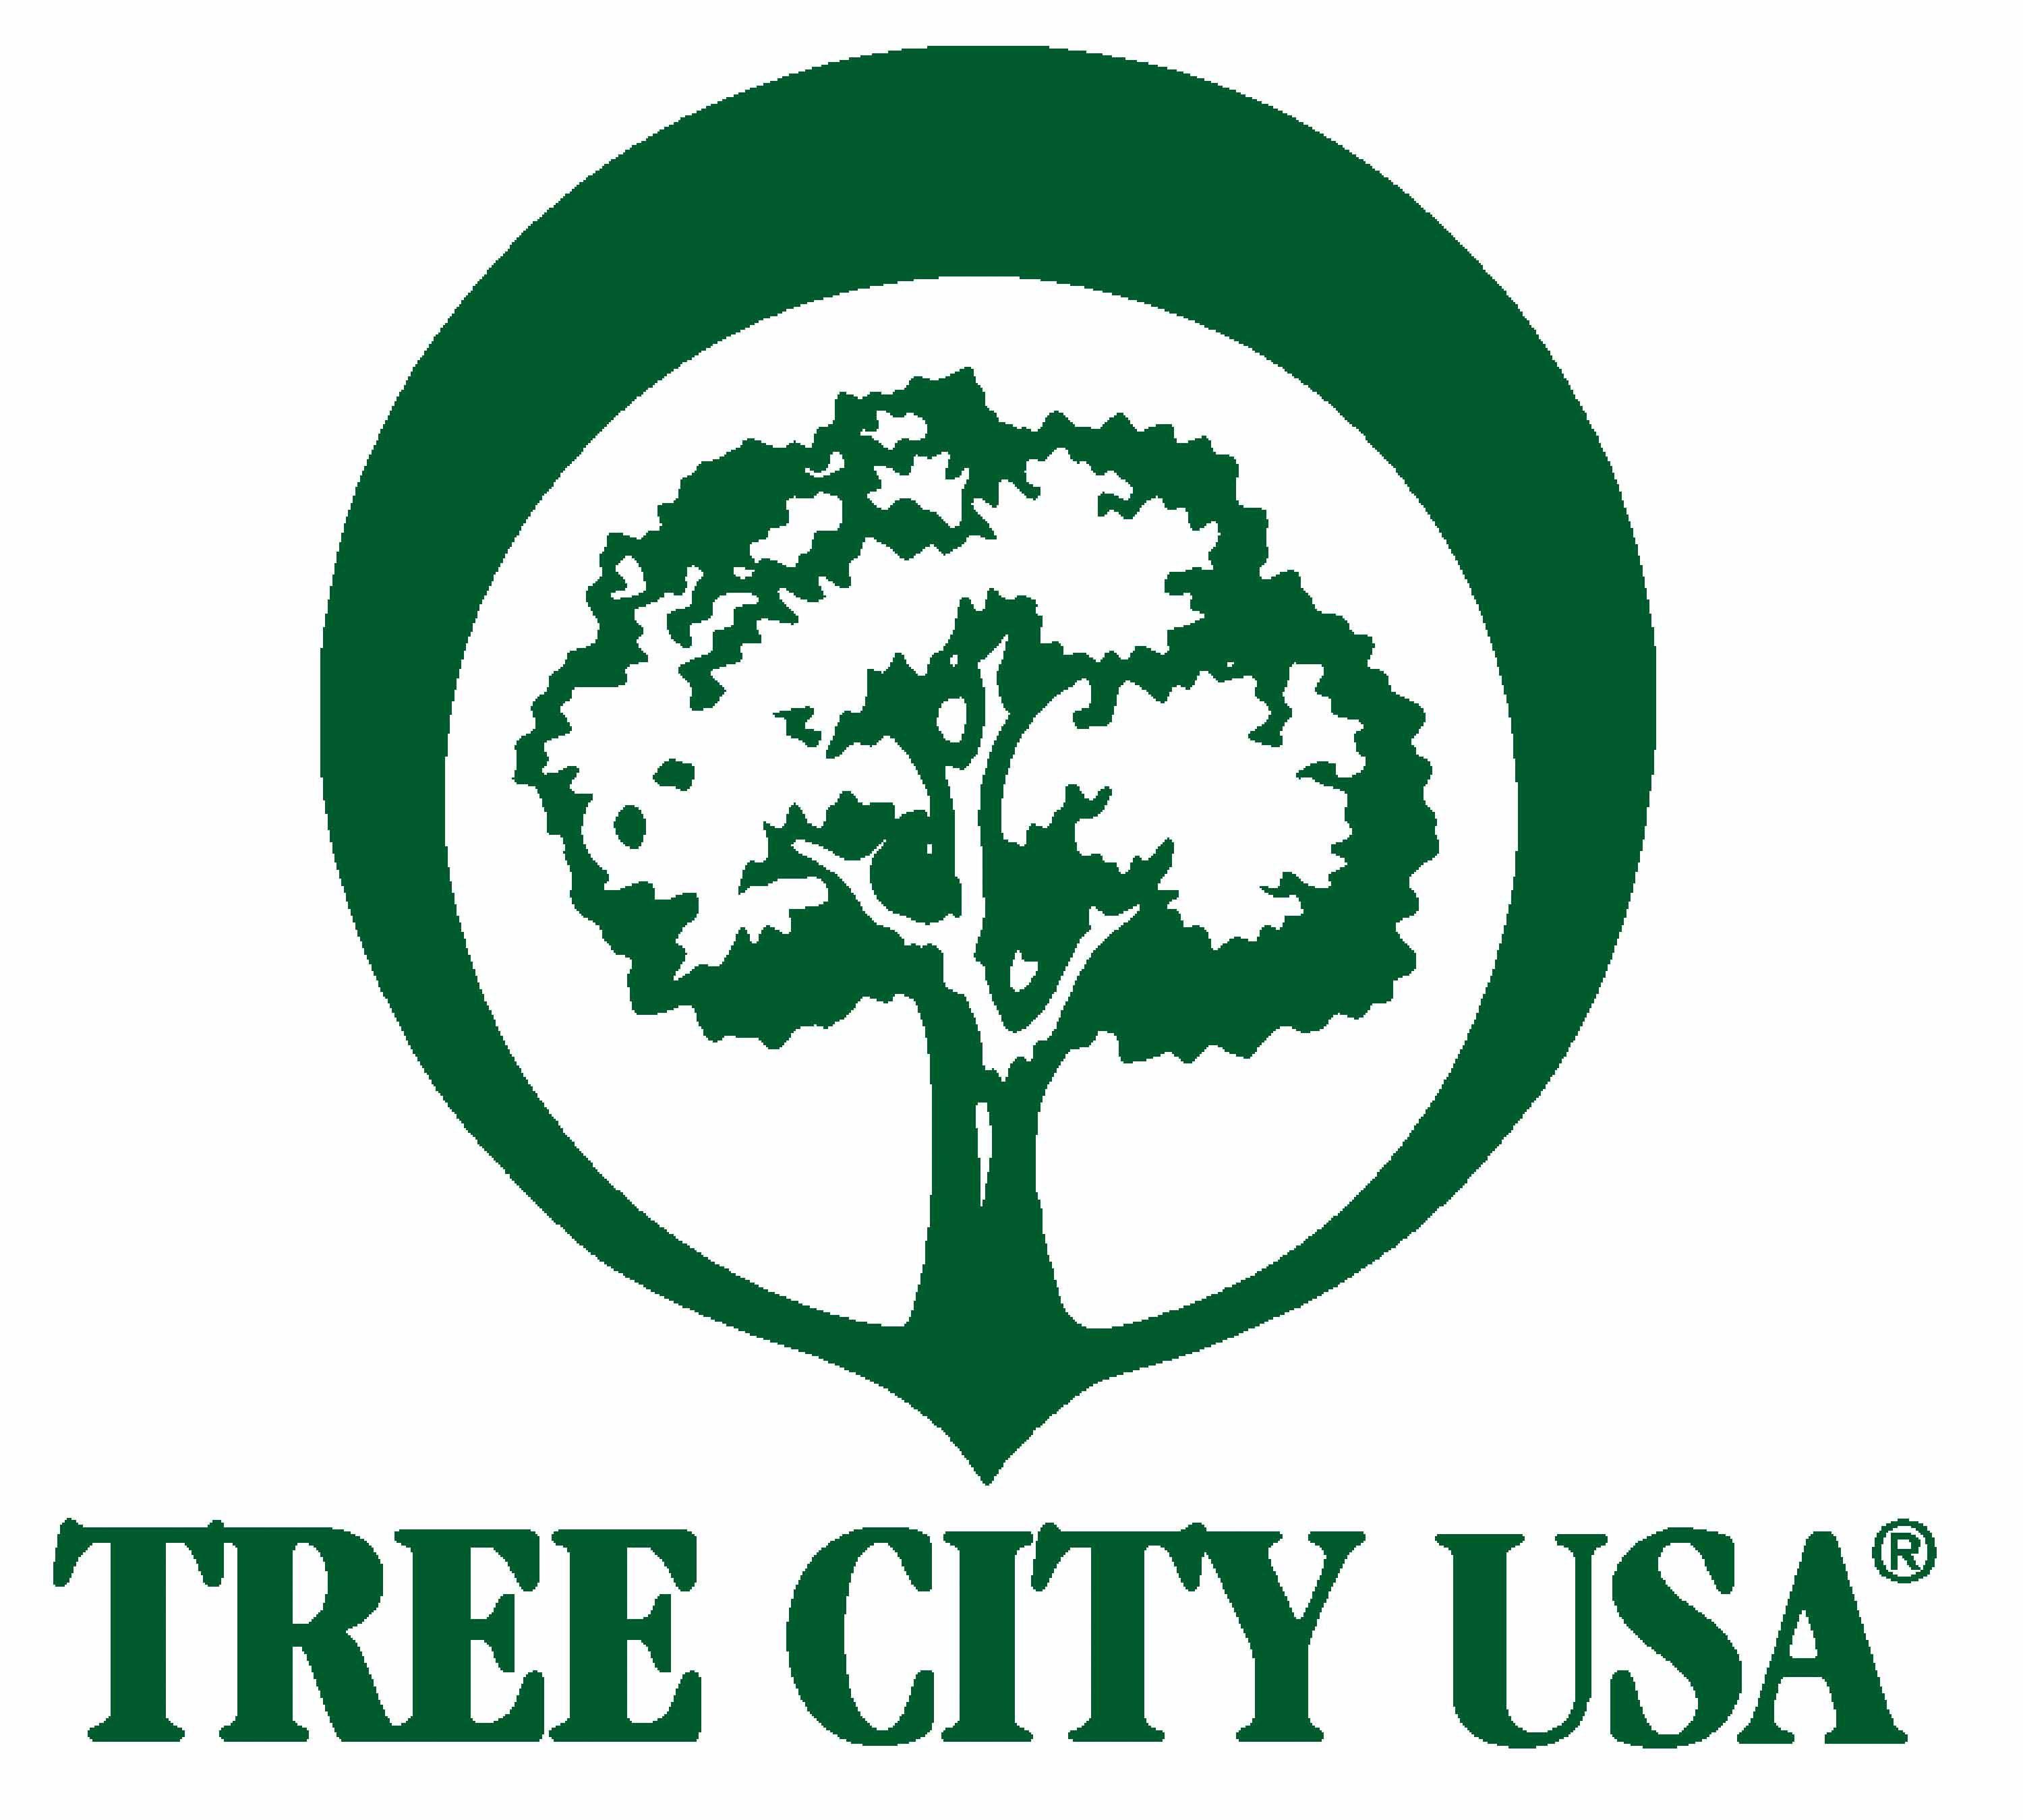 Keep It Green Logo - Is Your City a Tree City?